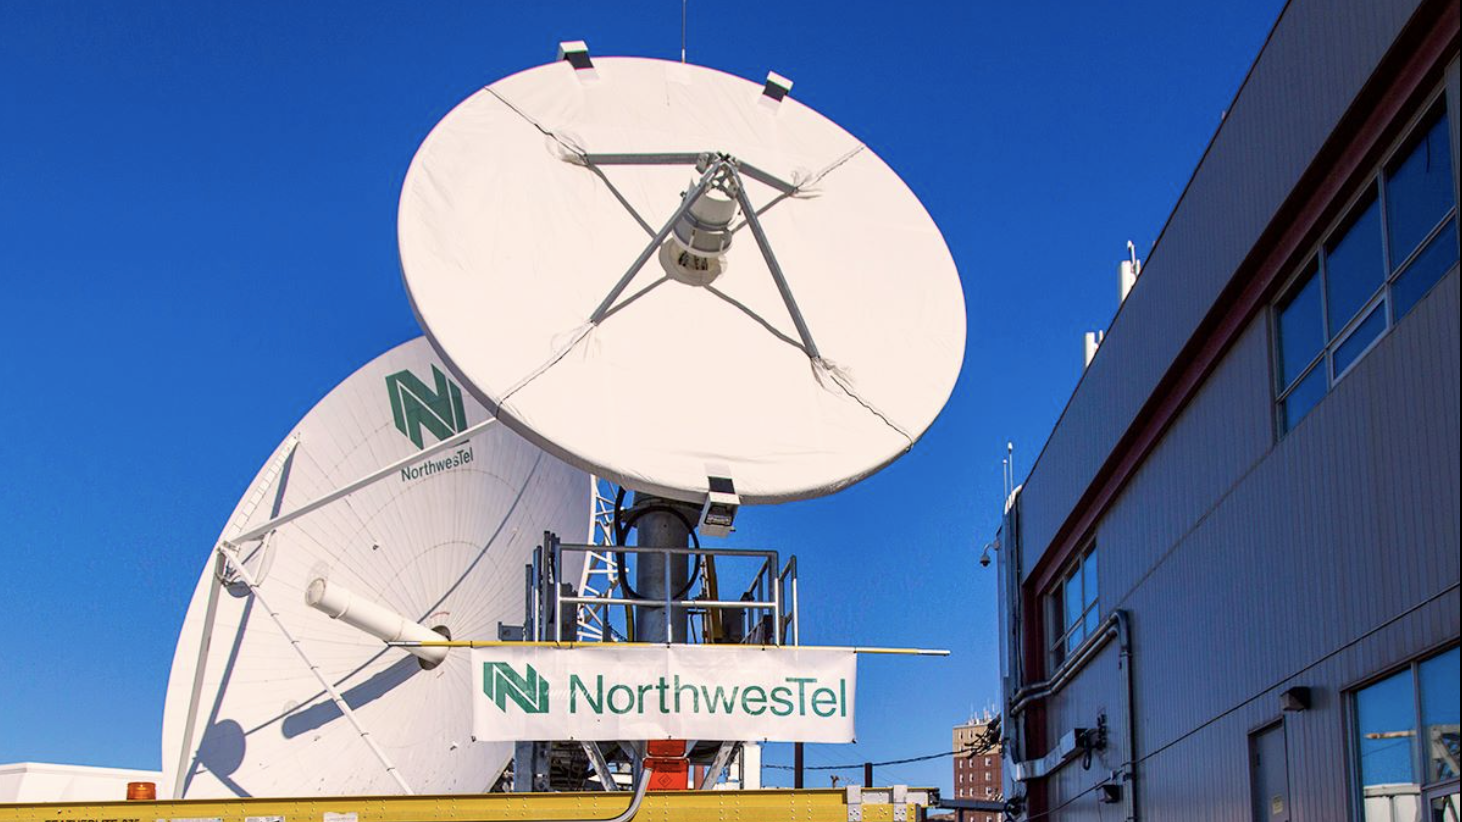 telecom-news-roundup:-special-deals-for-former-customers,-bell-selling-northwestel-[jun-8-14]